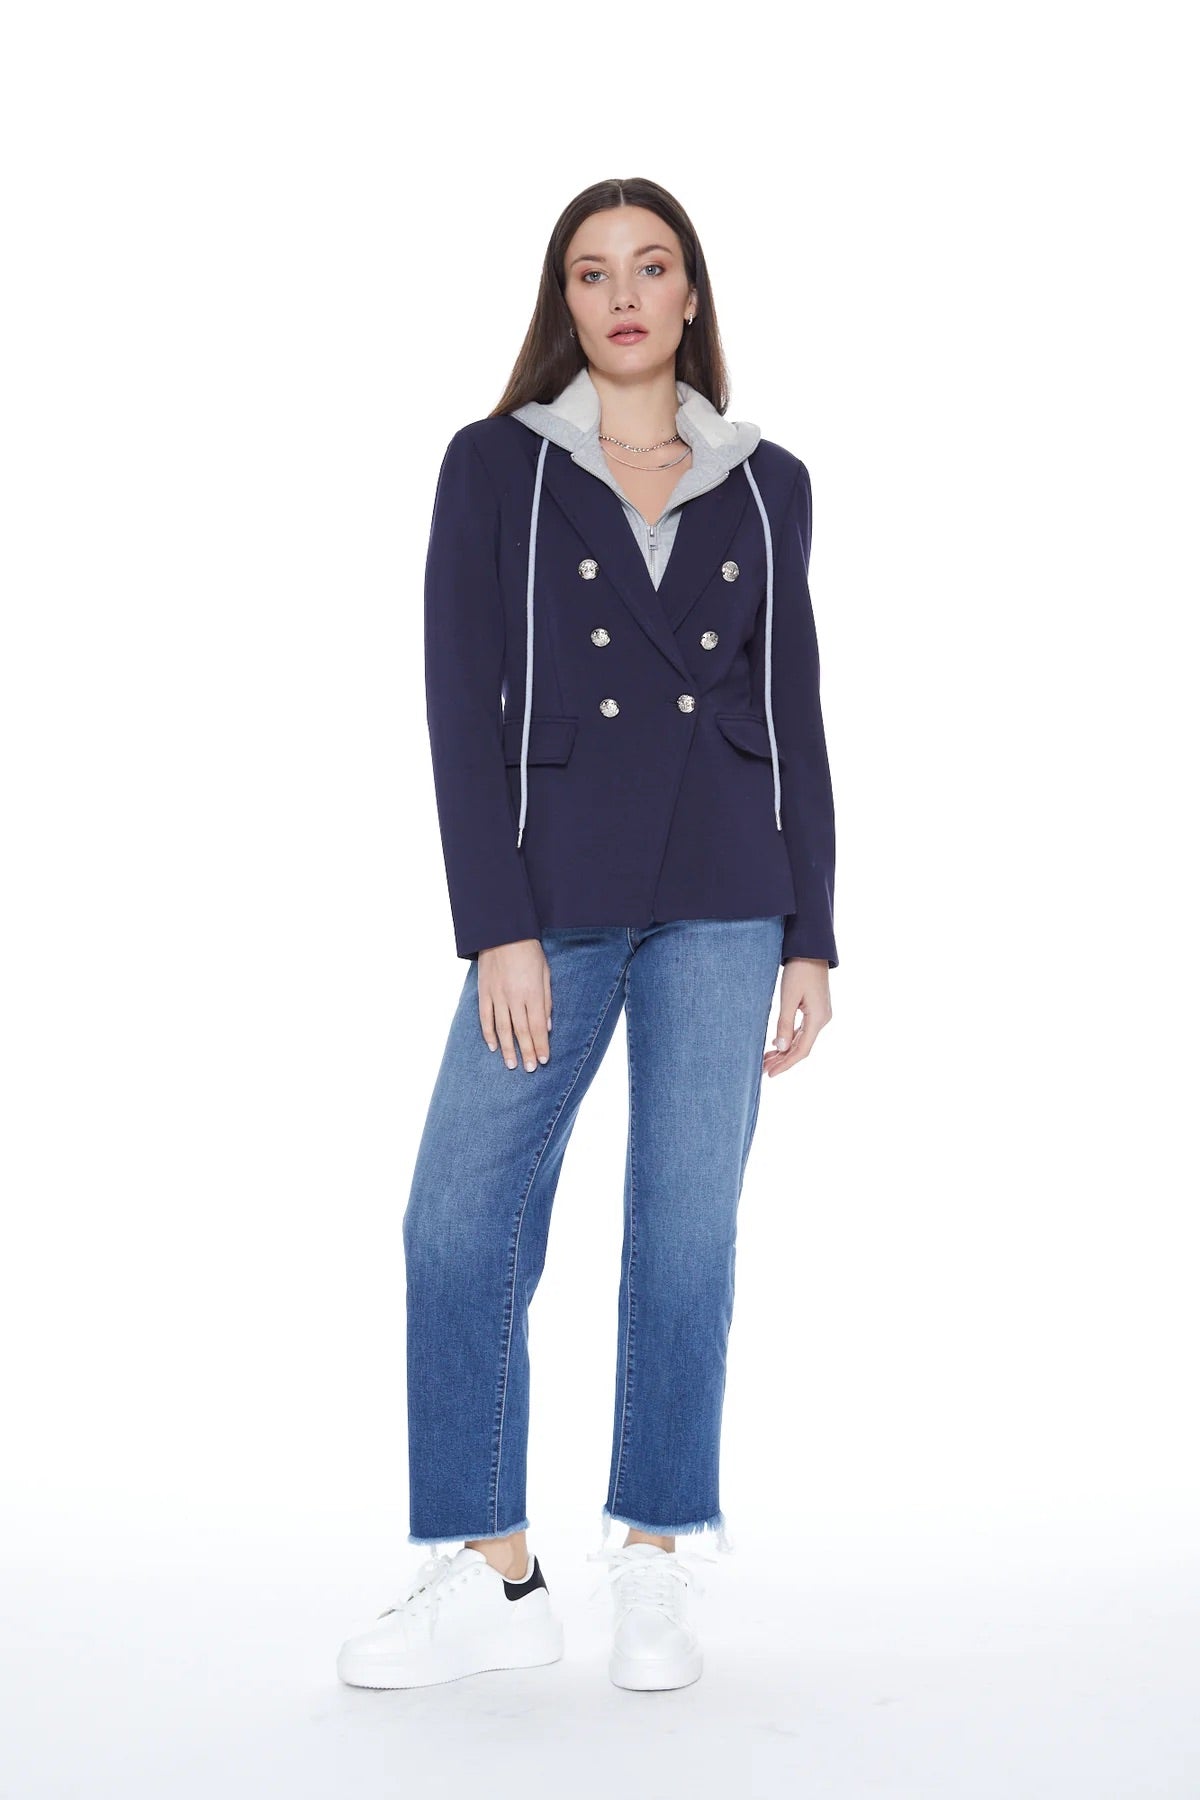 Helen Double Breasted Blazer in Navy and Heather